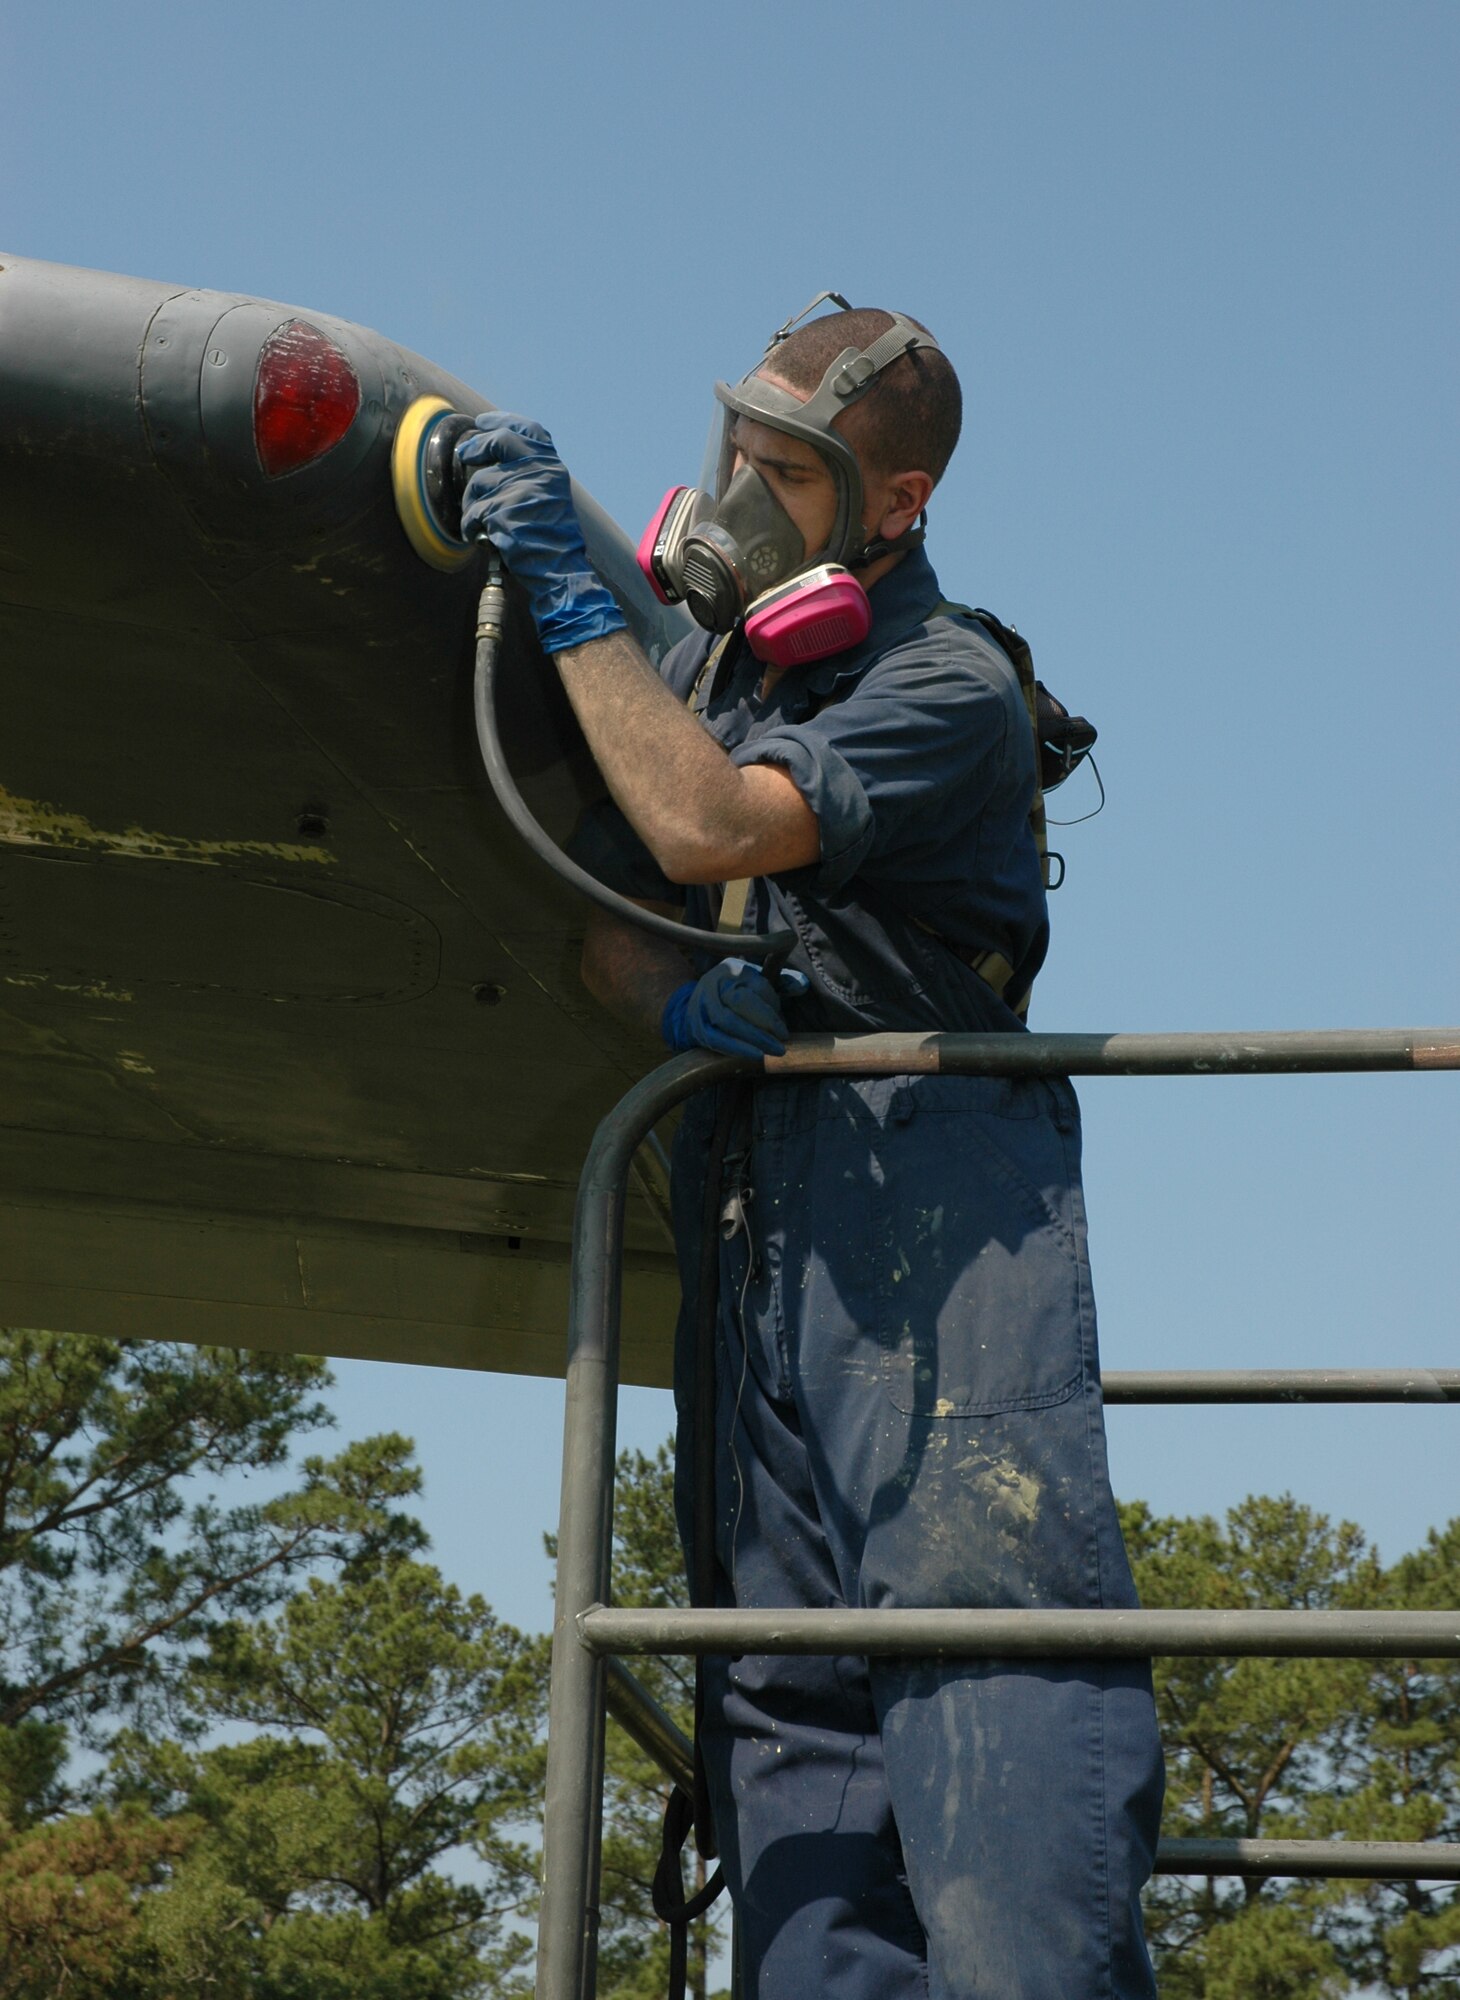 Senior Airman Ryan Mungavin, a reservist assigned to the 315th Maintenance Squadron, Charleston AFB, S.C. preps the C-141 Starlifter residing in Heritage Park for a new paint job. The new paint job will reflect the historical paint scheme of the final C-141 that recently retired during a ceremony at Wright-Patterson Air Force Base, Ohio. (Photo by 1st Lt. Wayne Capps, USAFR)